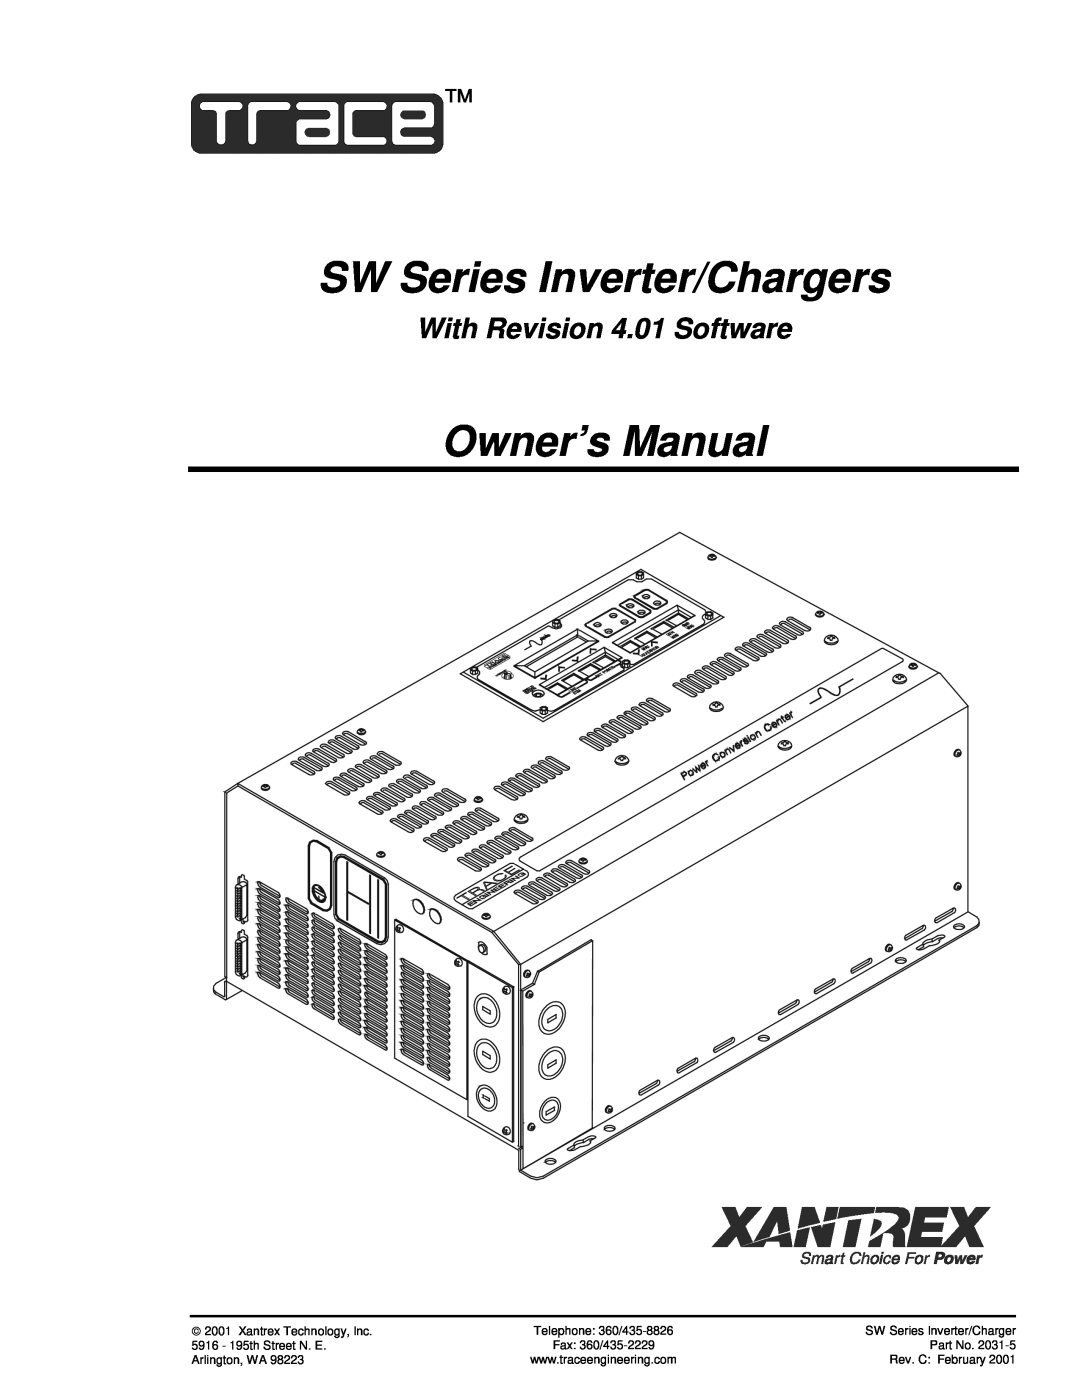 Xantrex Technology 120 VAC/60 owner manual With Revision 4.01 Software, SW Series Inverter/Chargers, Owner’s Manual 